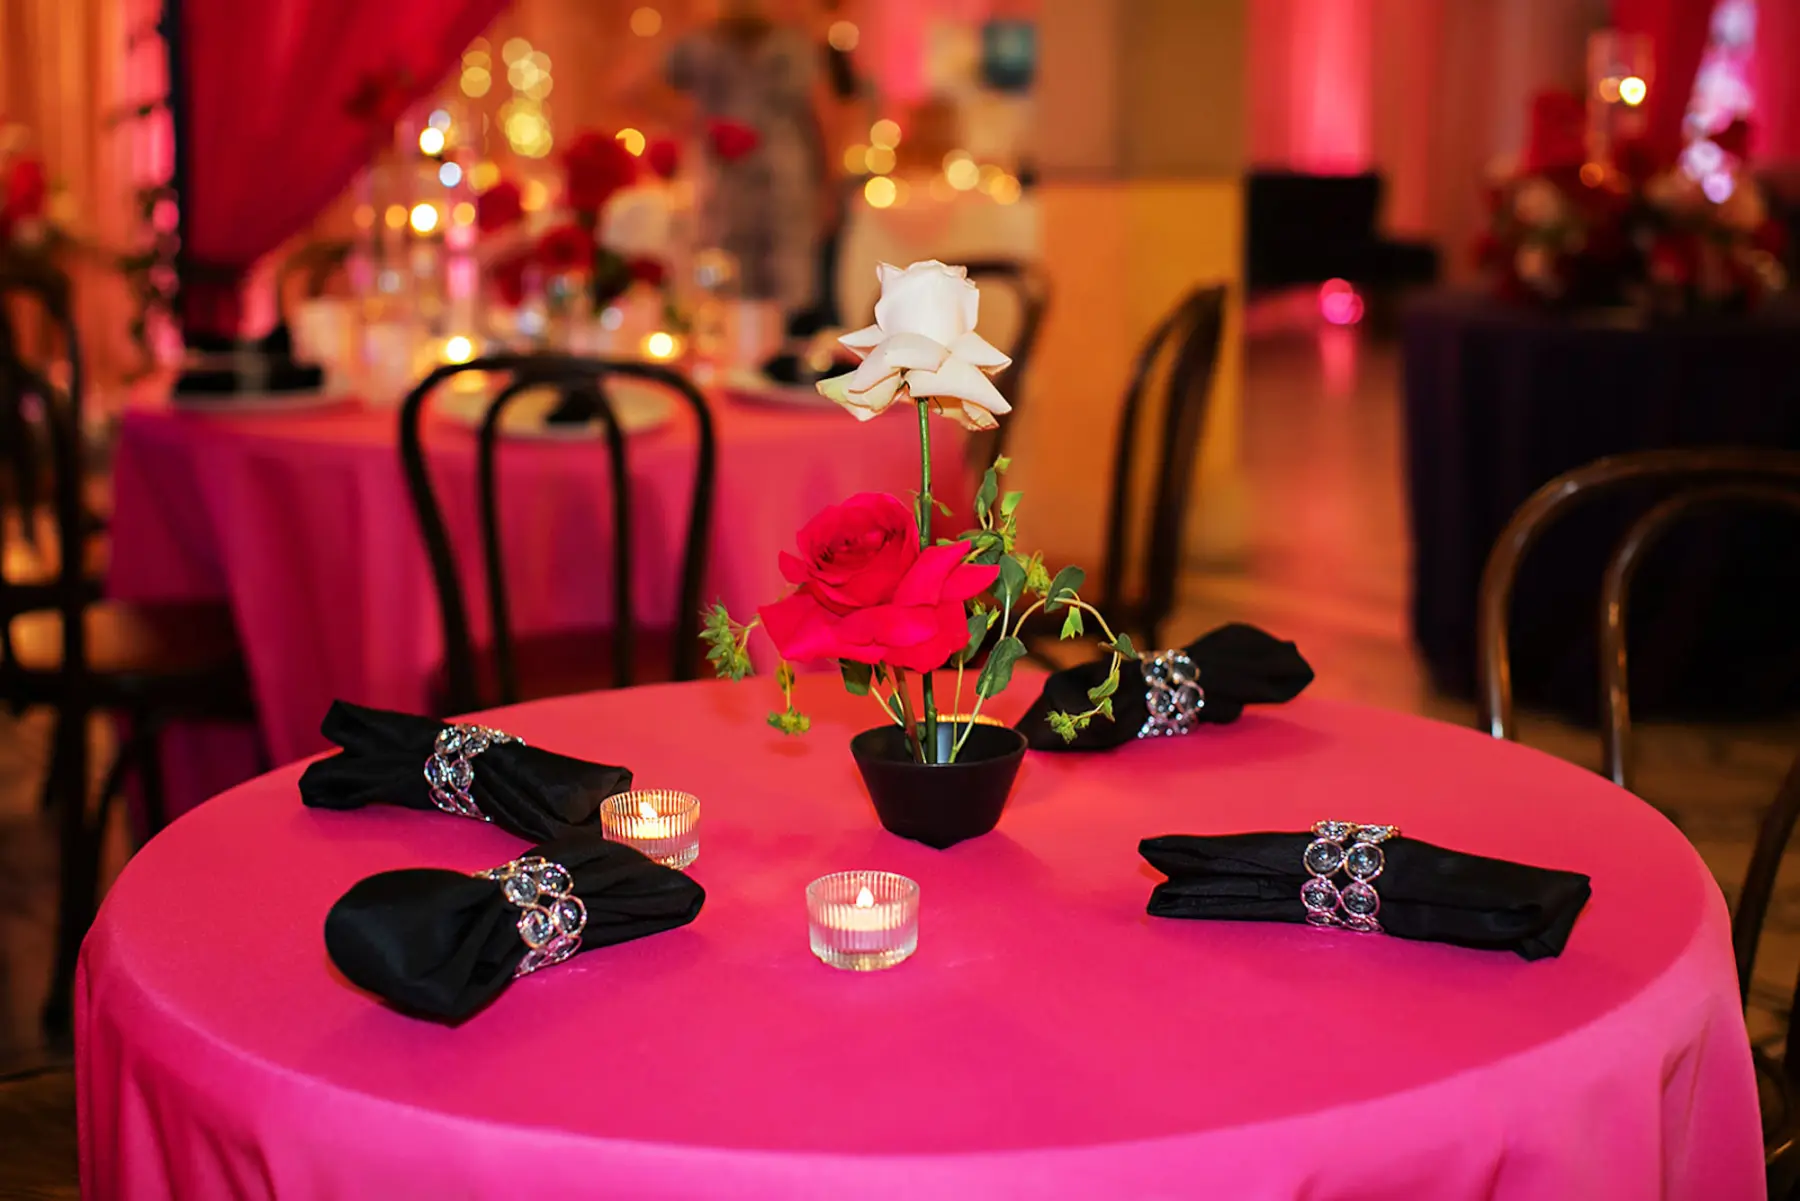 Pink and Black Wedding Reception Inspiration | Pink and Red Rose Centerpiece Decor Ideas | Tampa Bay Outside The Box Rentals